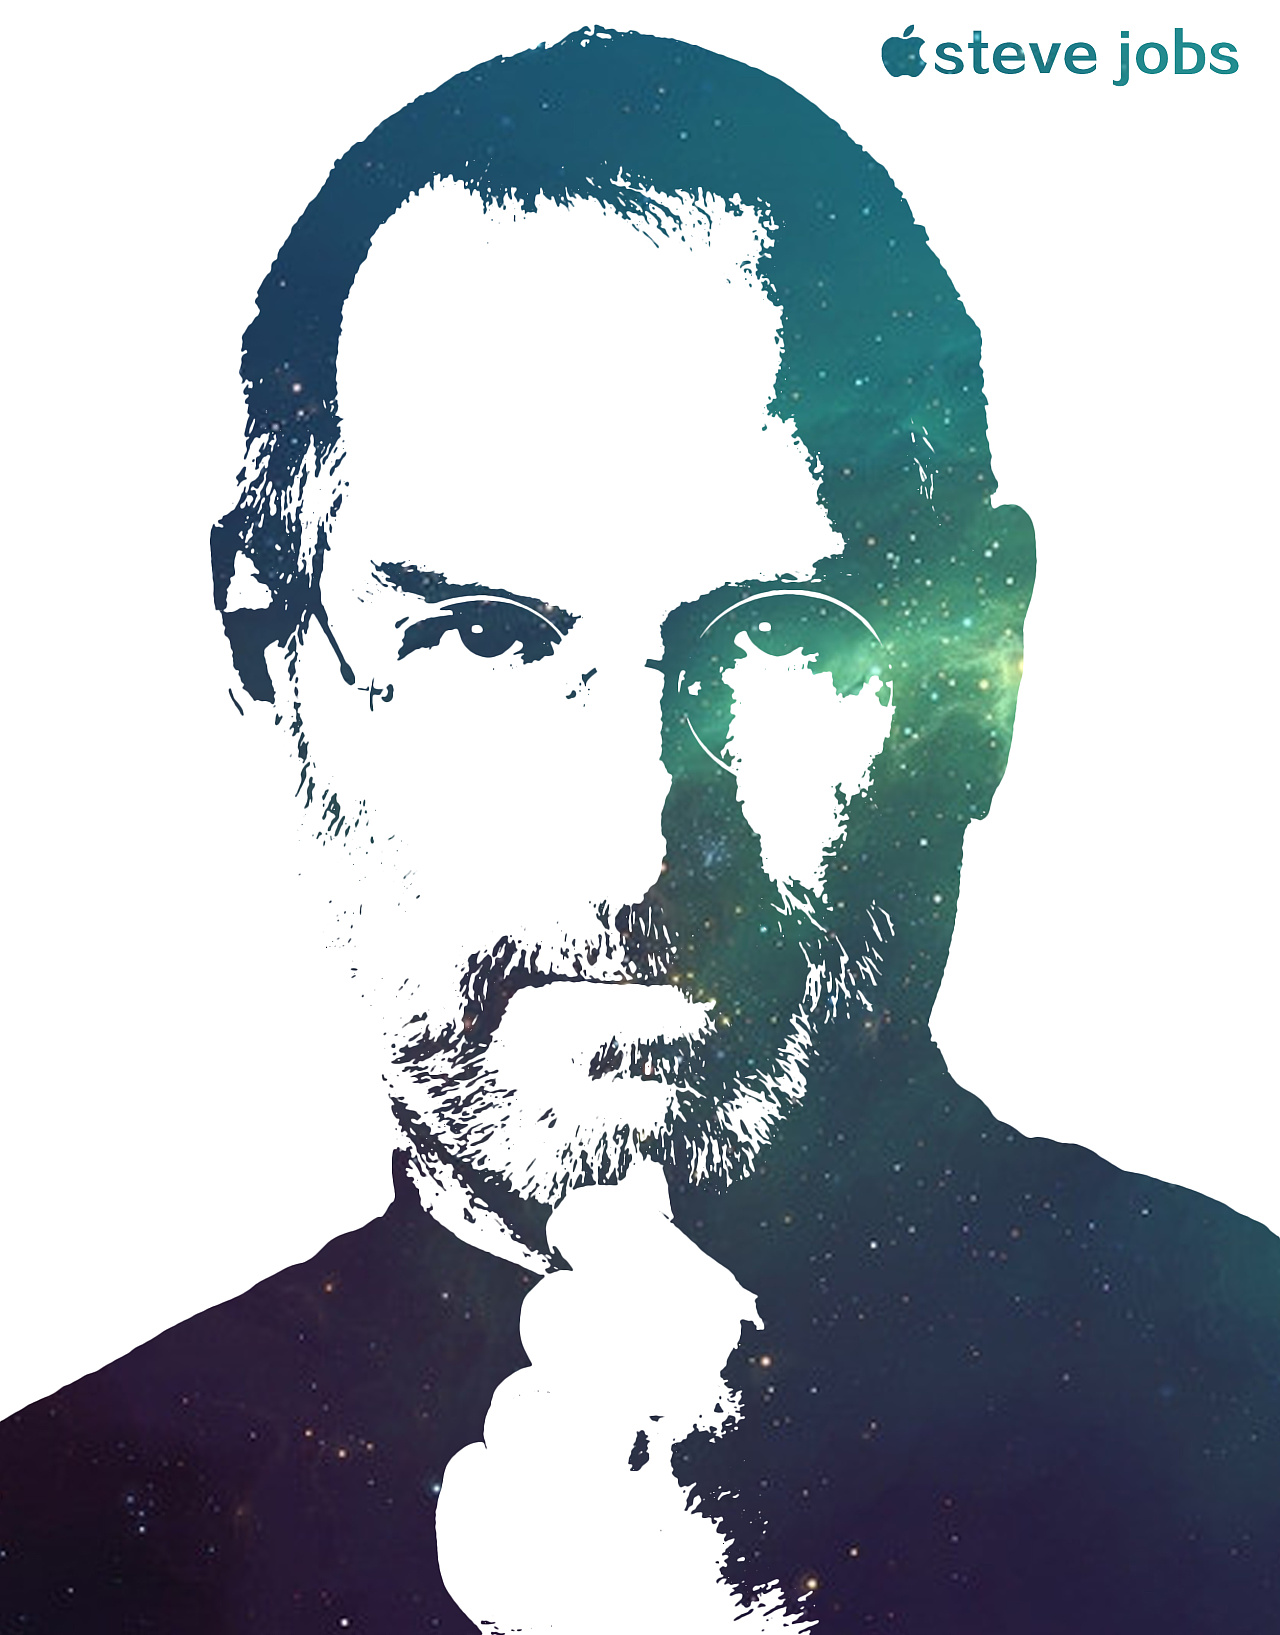 40 memories from the legacy of Steve Jobs